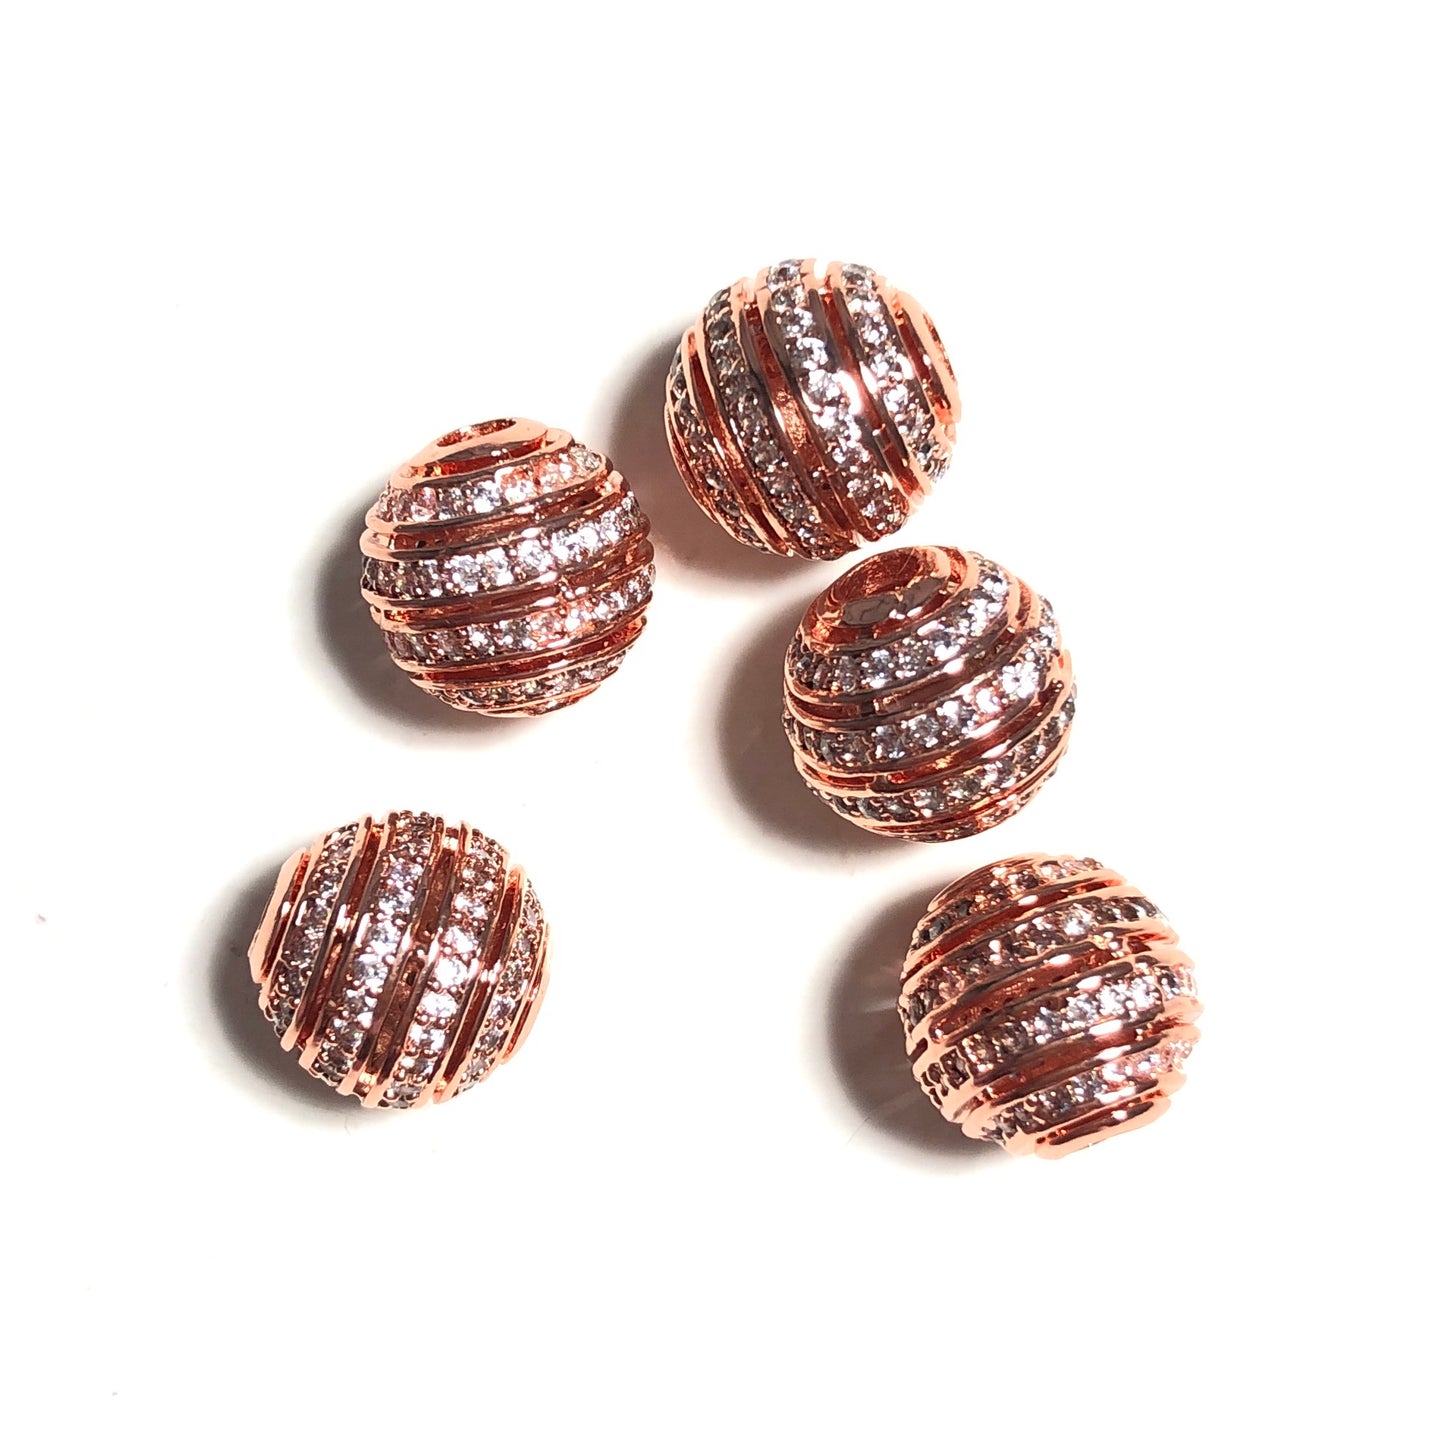 20pcs/lot 10mm CZ Paved Hollow Round Ball Spacers Rose Gold CZ Paved Spacers 10mm Beads Ball Beads Charms Beads Beyond